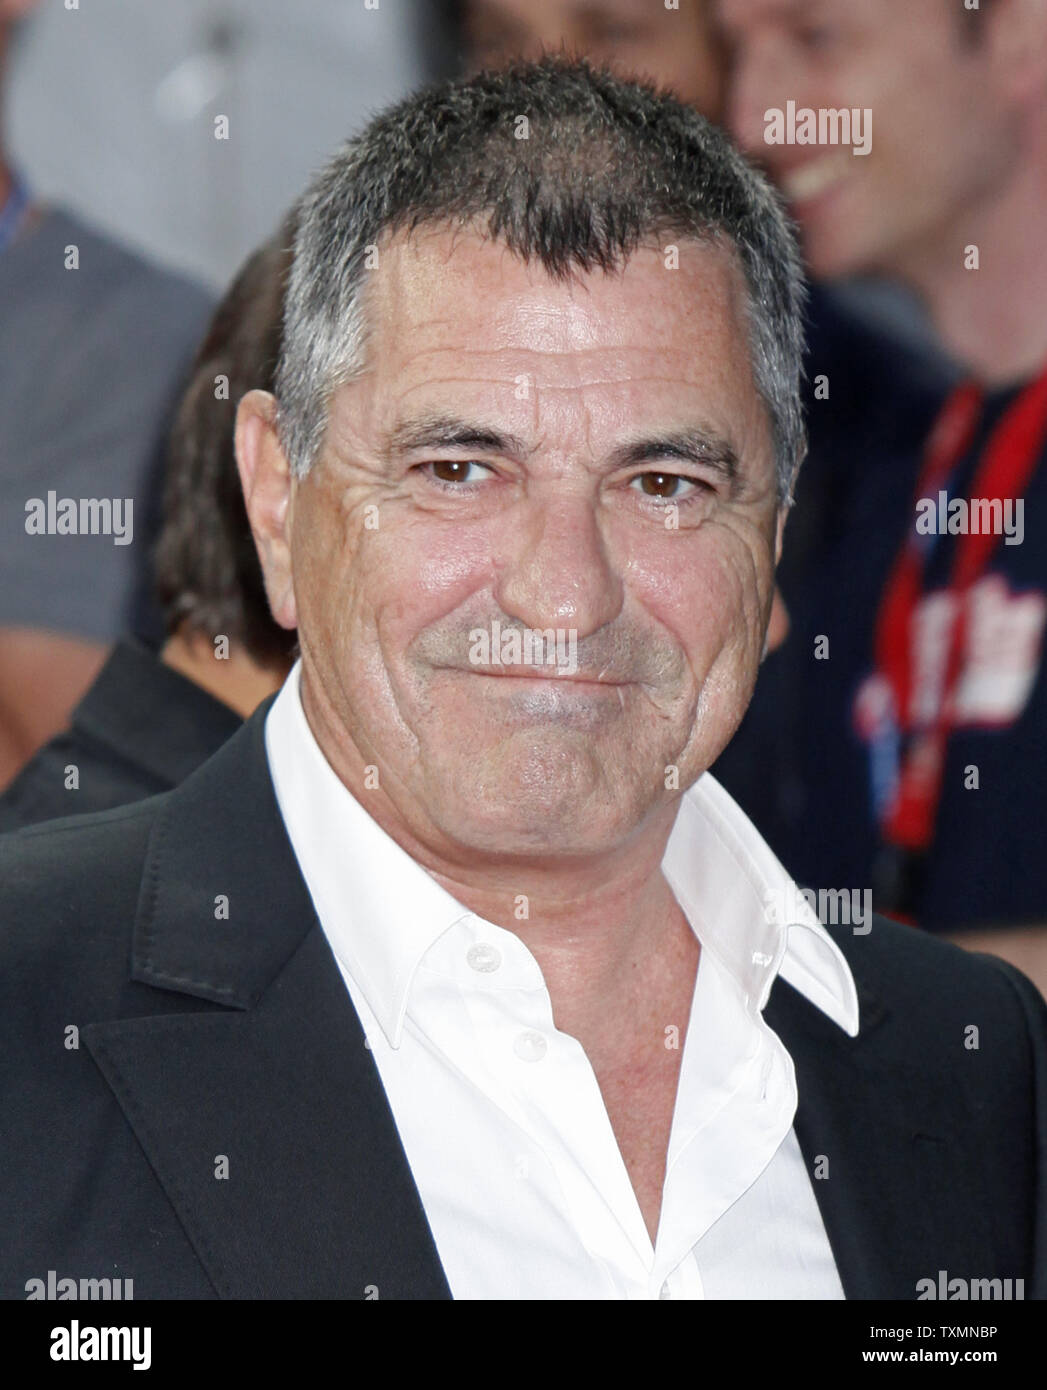 Writer Jean-Marie Bigard arrives on the red carpet before a screening of film 'Like Dandelion Dust' during the 35th American Film Festival of Deauville in Deauville, France on September 7, 2009.    UPI/David Silpa Stock Photo